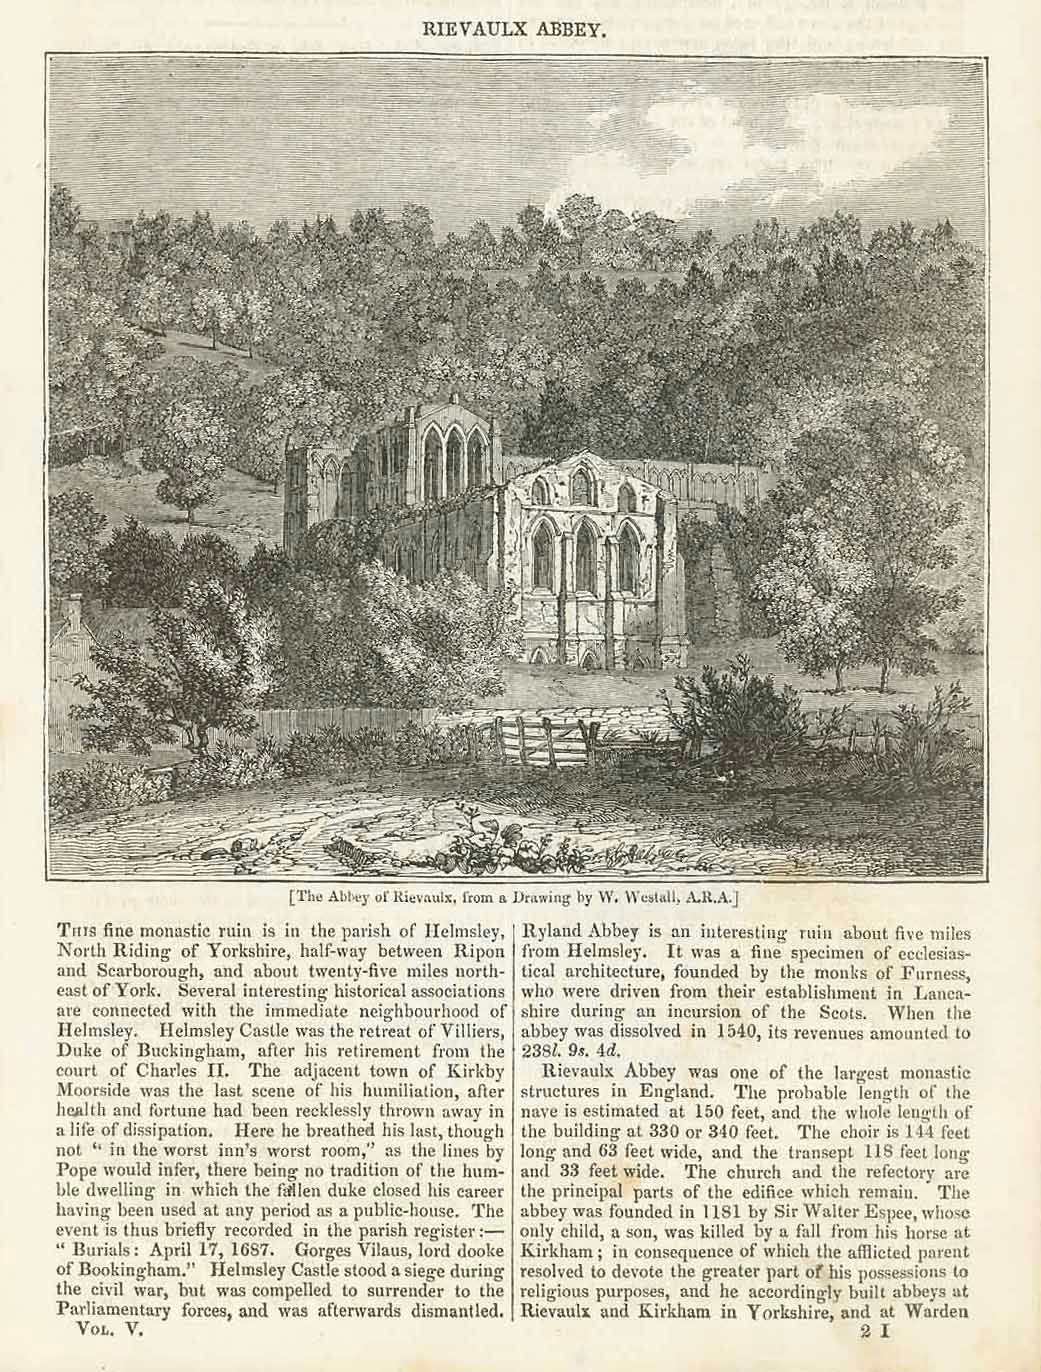 "The Abbey of Rievaulx, from a drawing by W. Westall, A.R.A."  Wood engraving and article published 1836. Text about Rievaulx Abbey continues on the reverse side.  Original antique print  